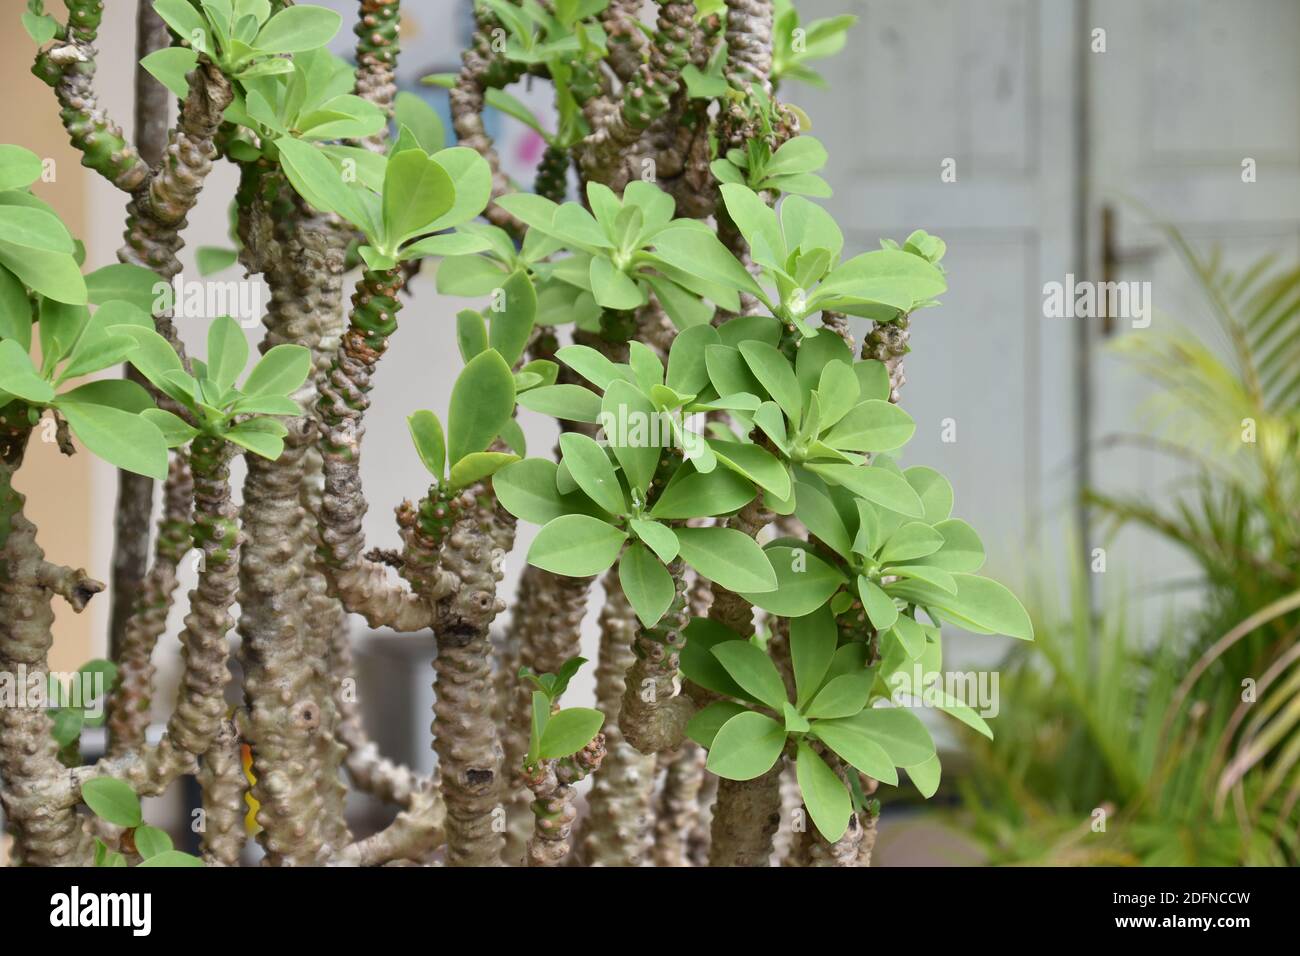 Euphorbia neriifolia with green and clean leaves Stock Photo